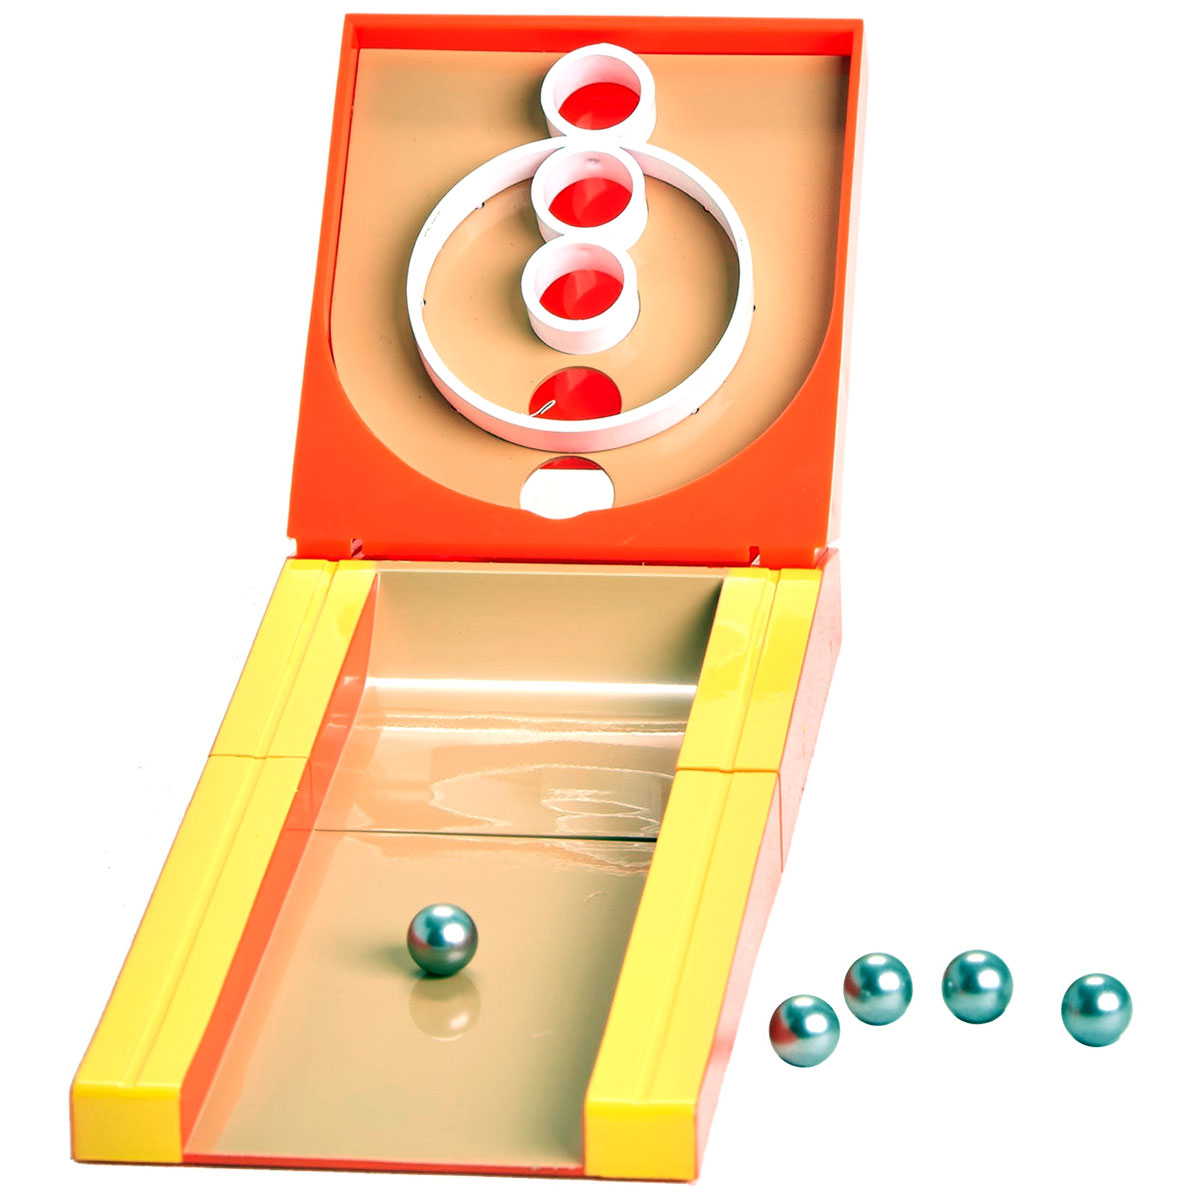 Play Mini Skee-Ball and Other Classic Games at Your Desk